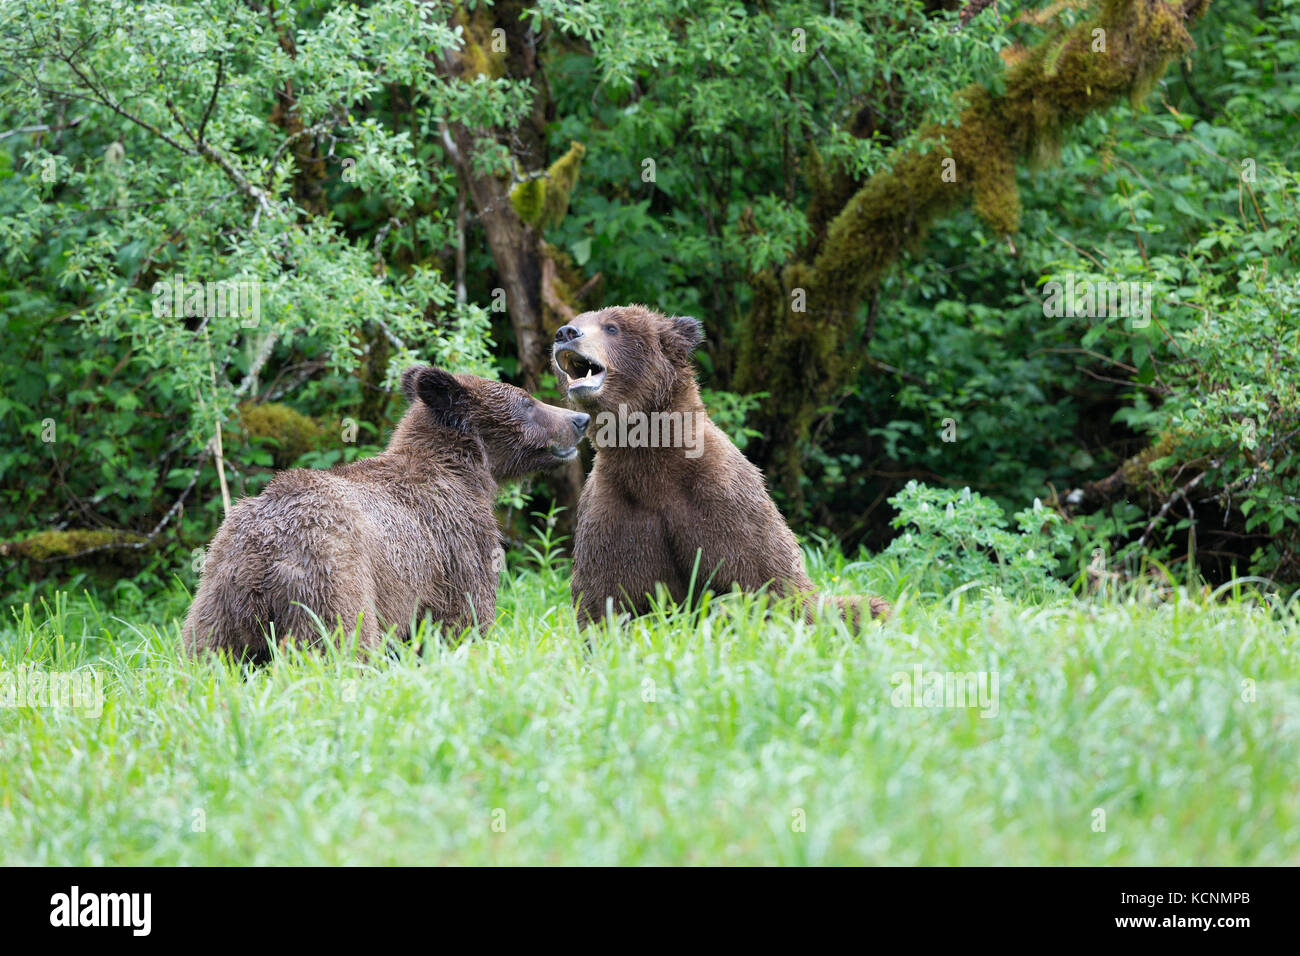 Grizzly bear (Ursus arctos horribilis), young male (right) and female courting, Khutzeymateen Inlet, Khutzeymateen Grizzly Bear Sanctuary, British Columbia, Canada Stock Photo